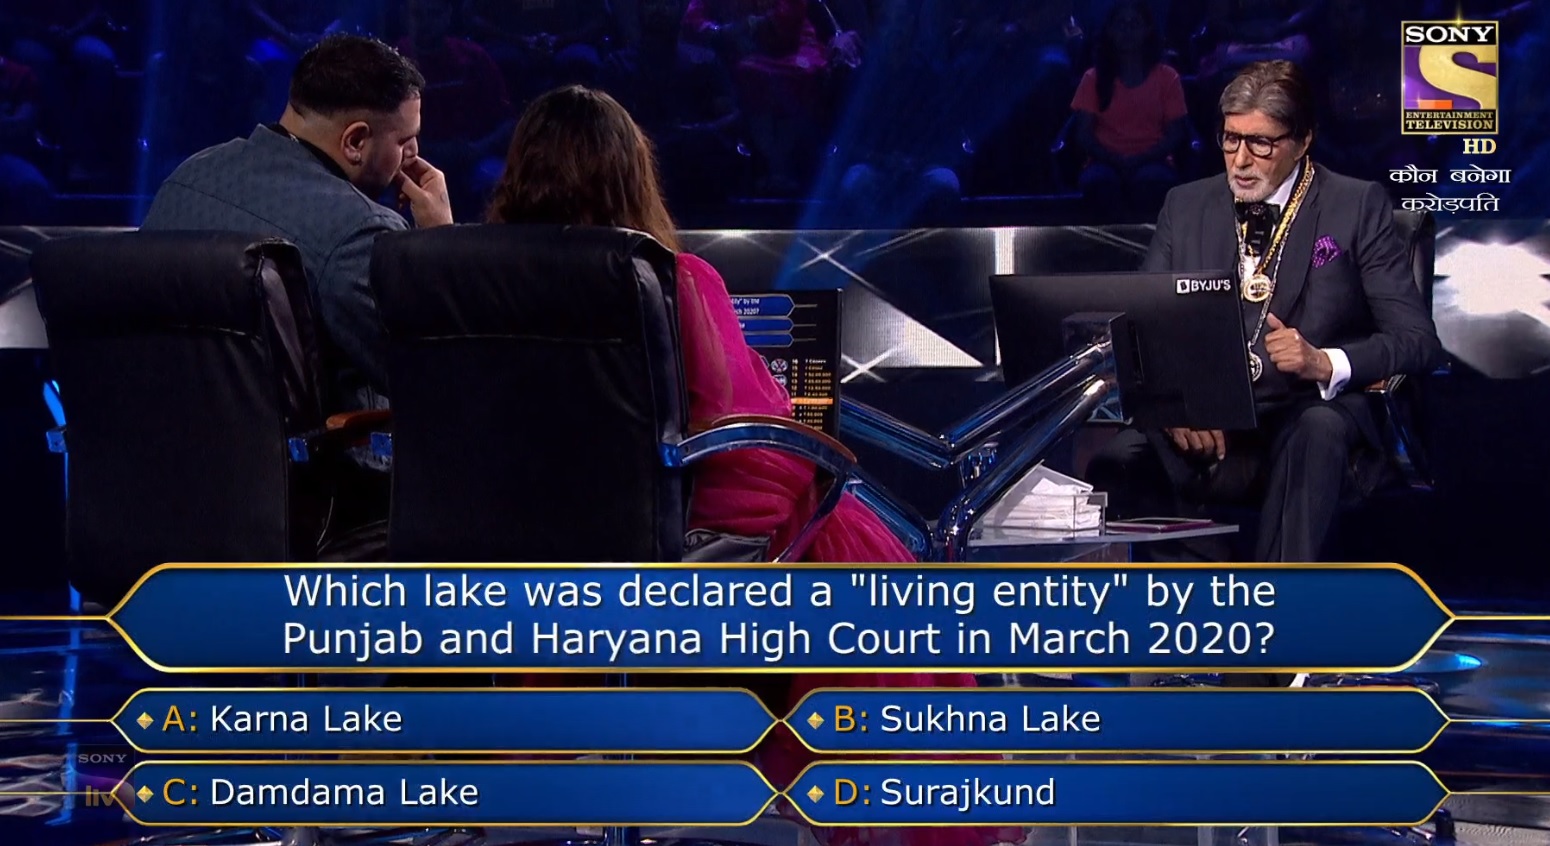 Ques : Which lake was declared a “living entity” by the Punjab and Haryana High Court in March 2020?